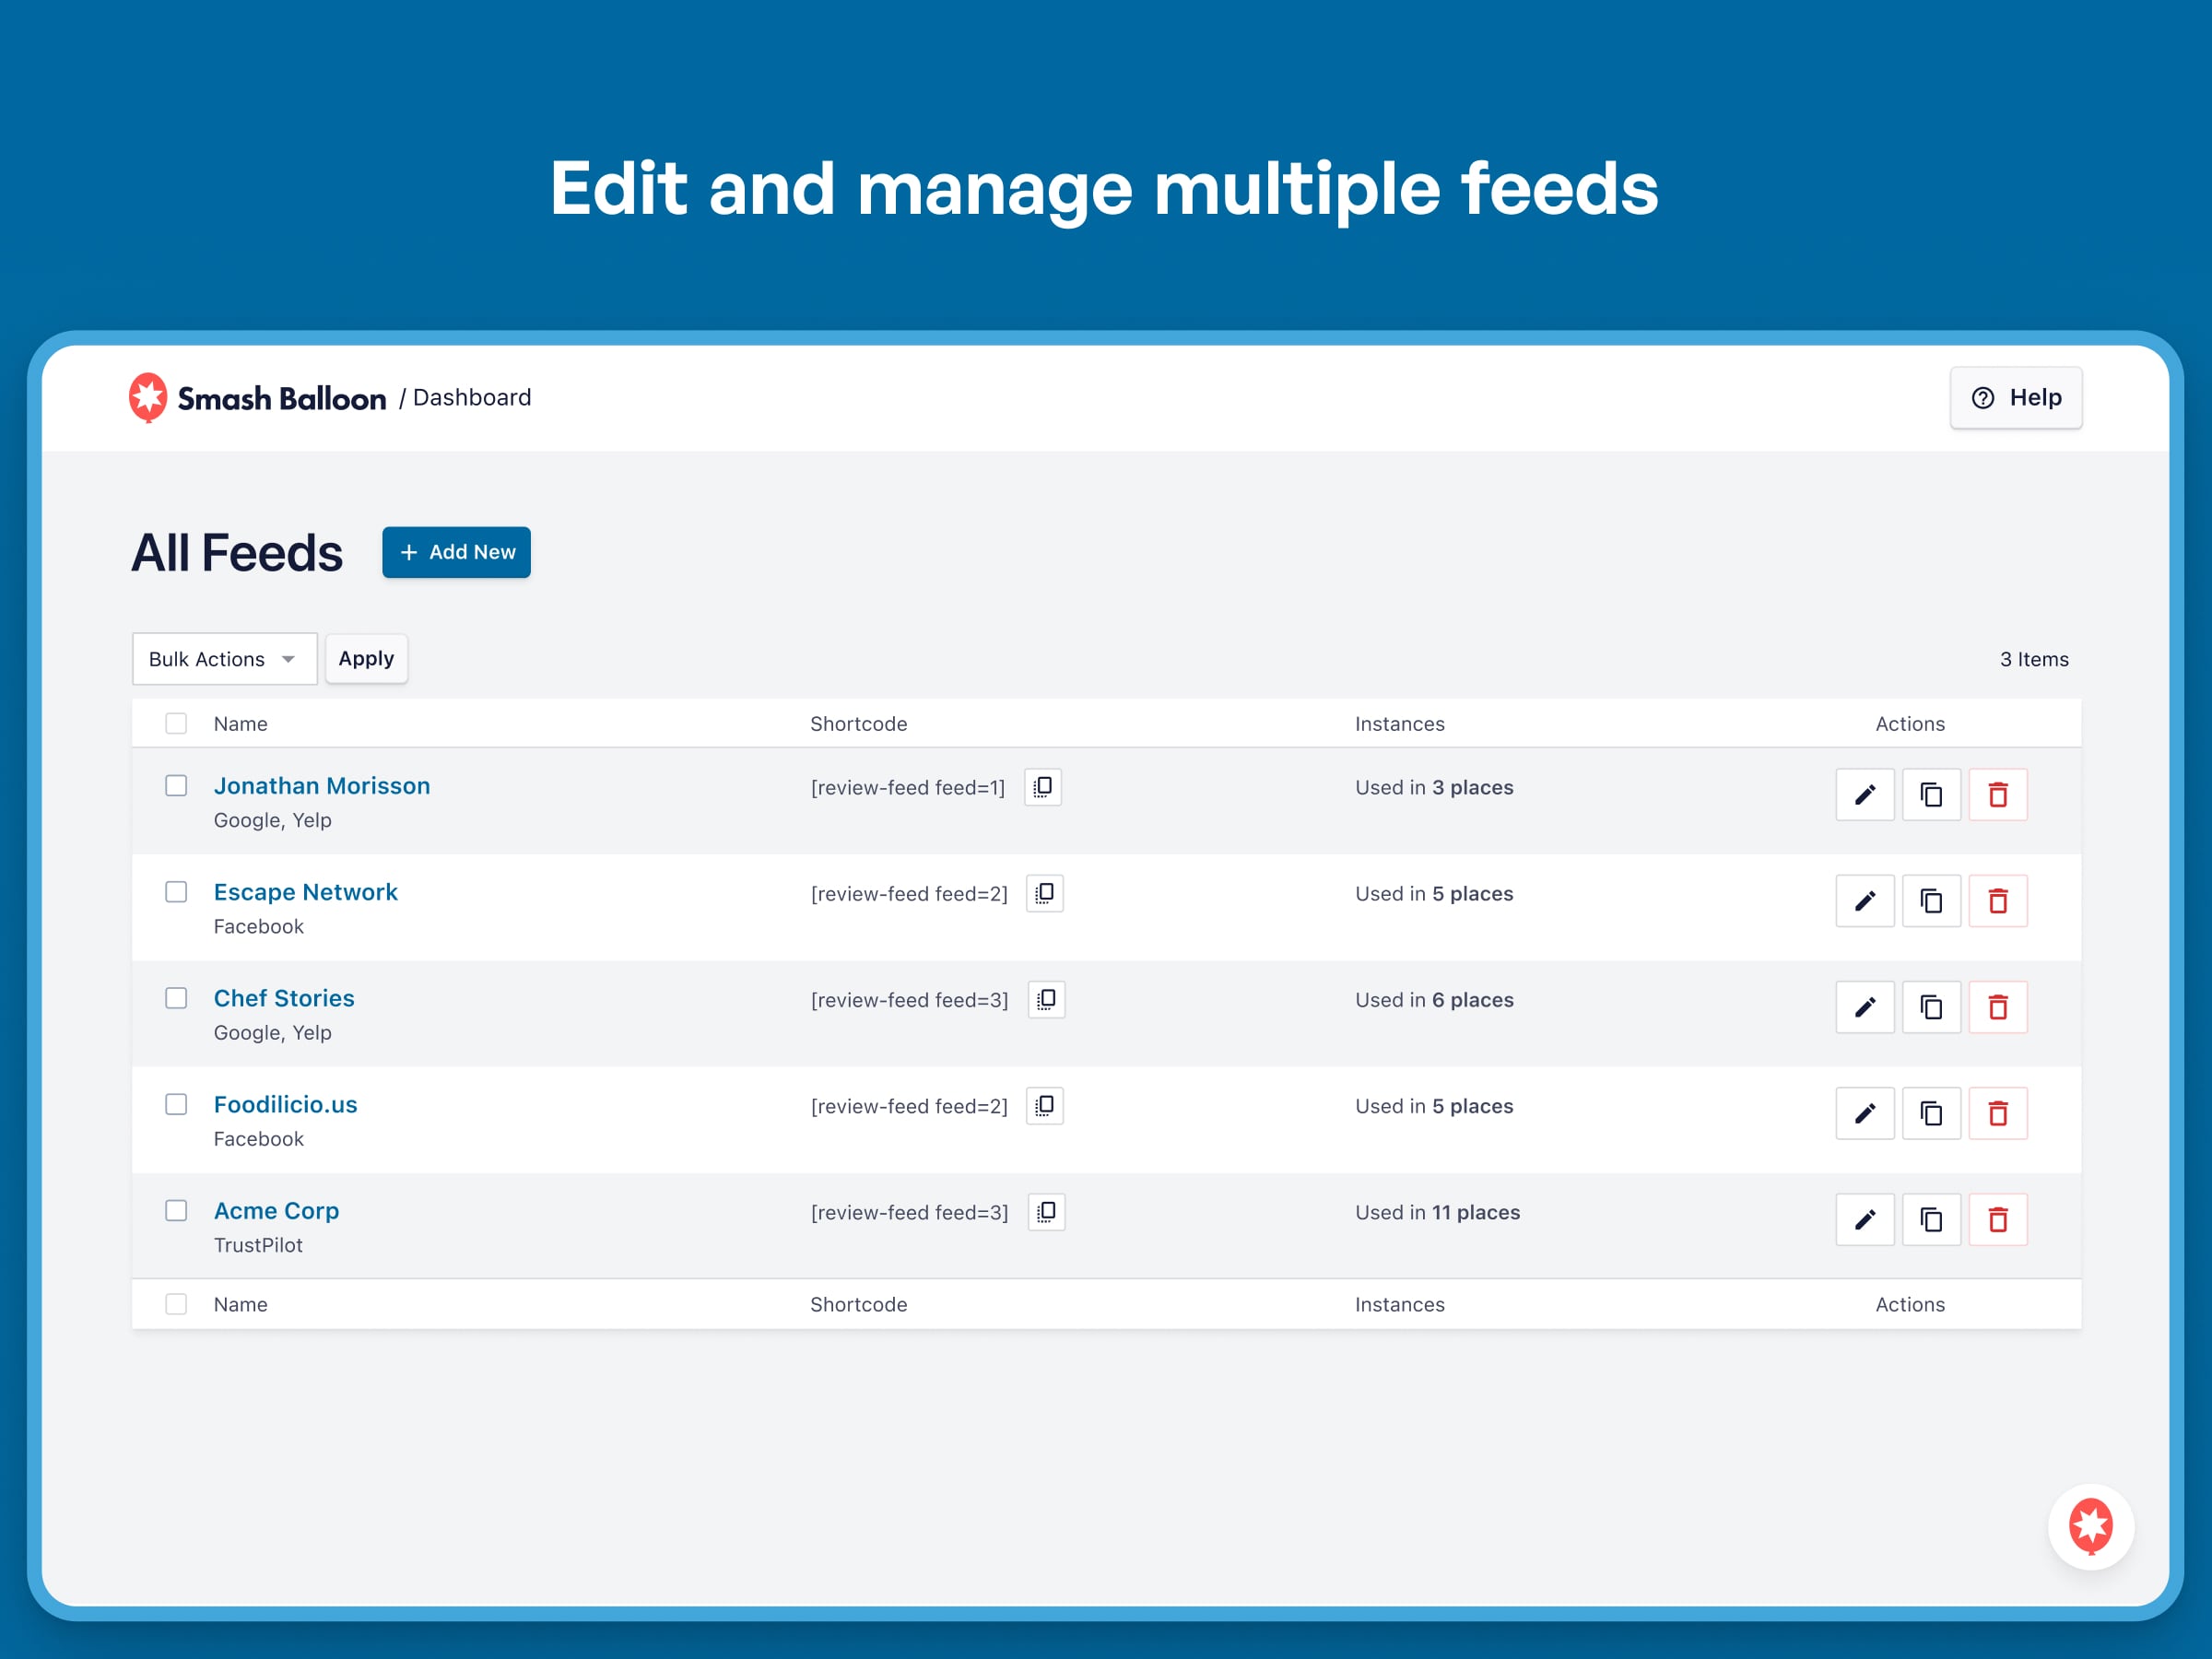 Edit and manage multiple feeds